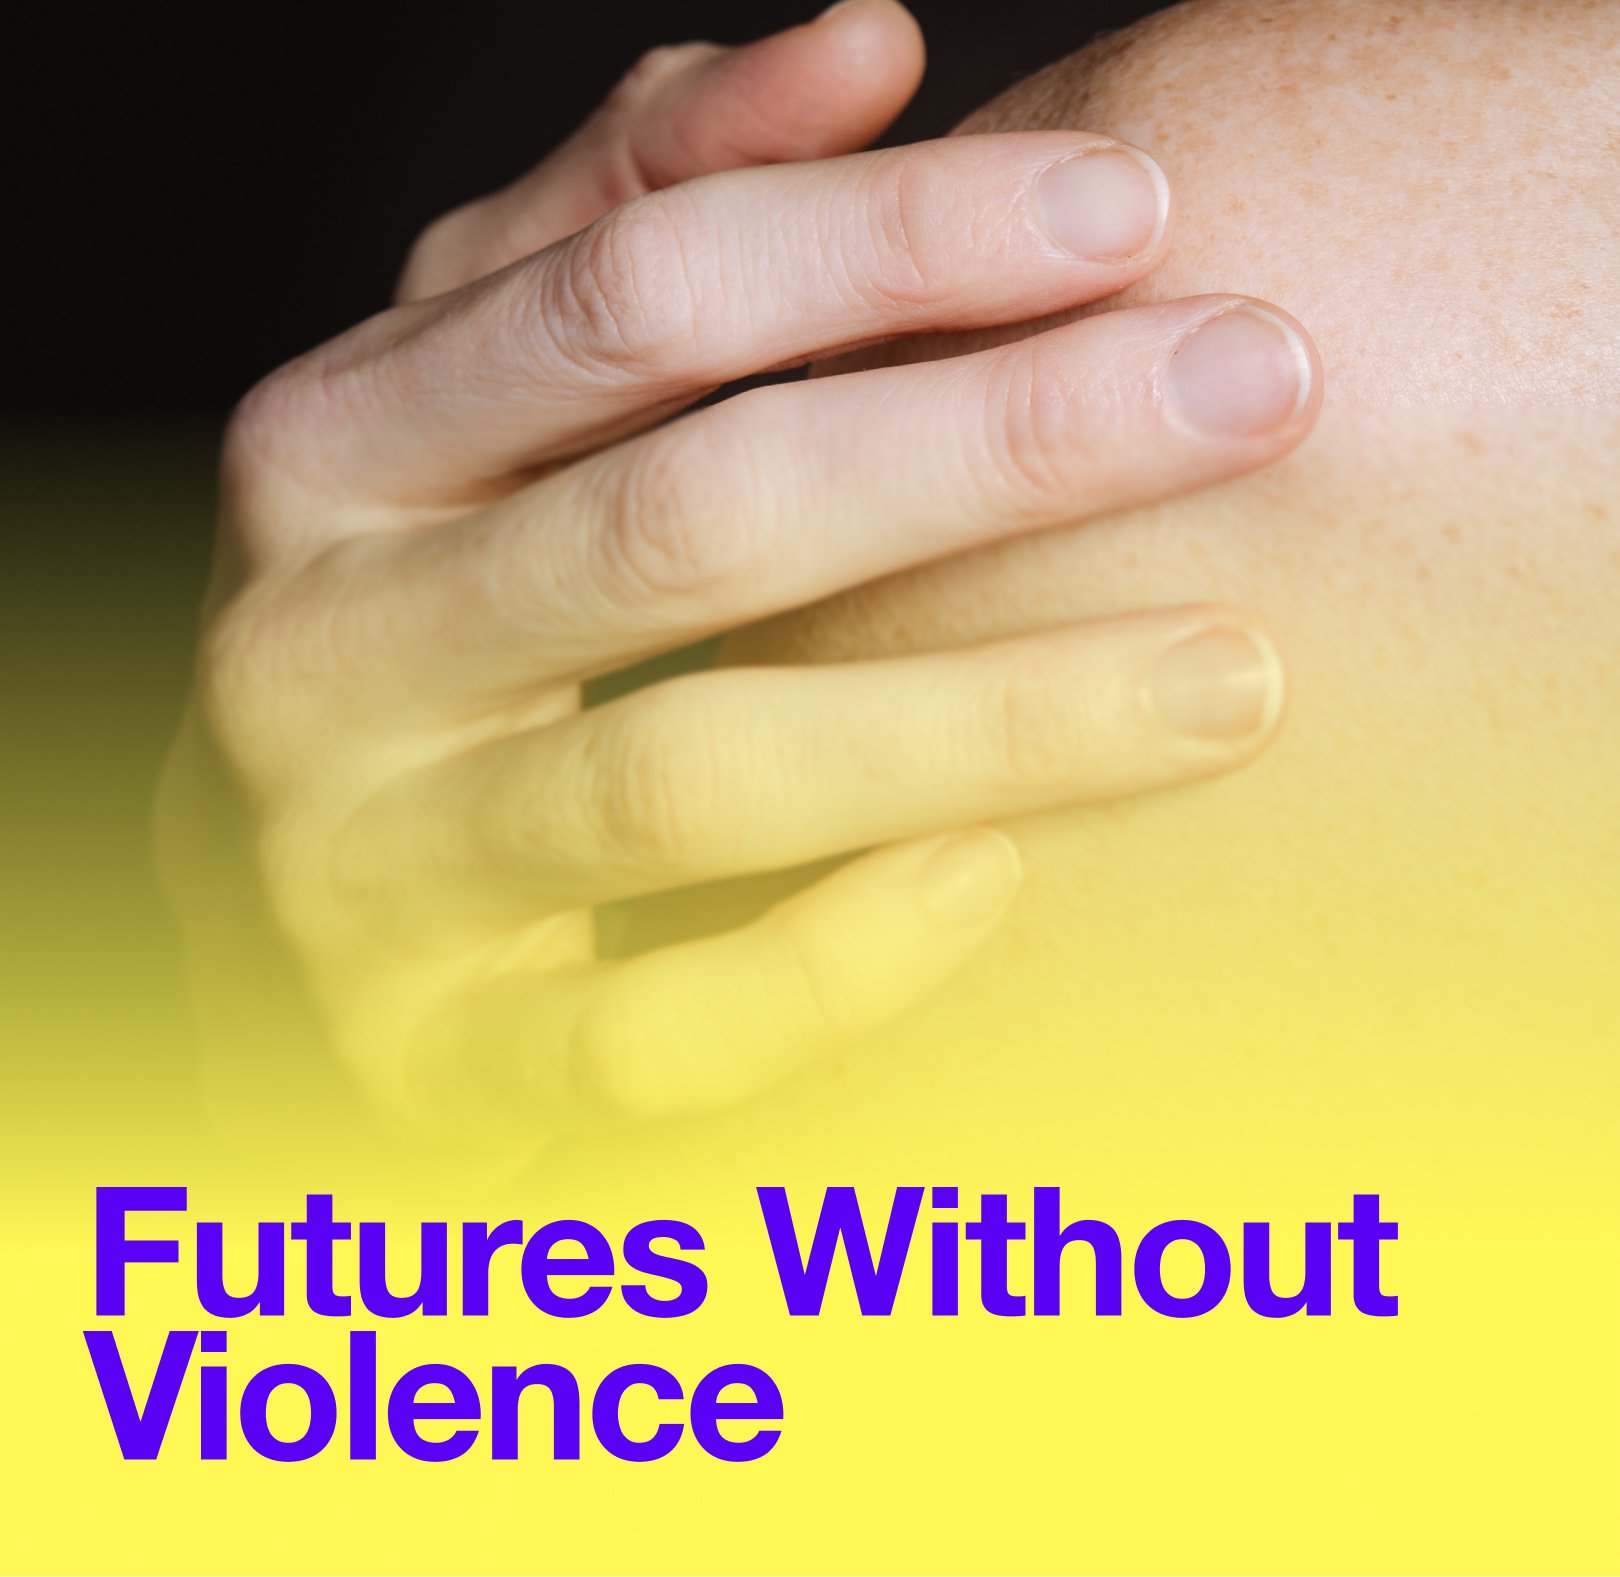 Futures without Violence